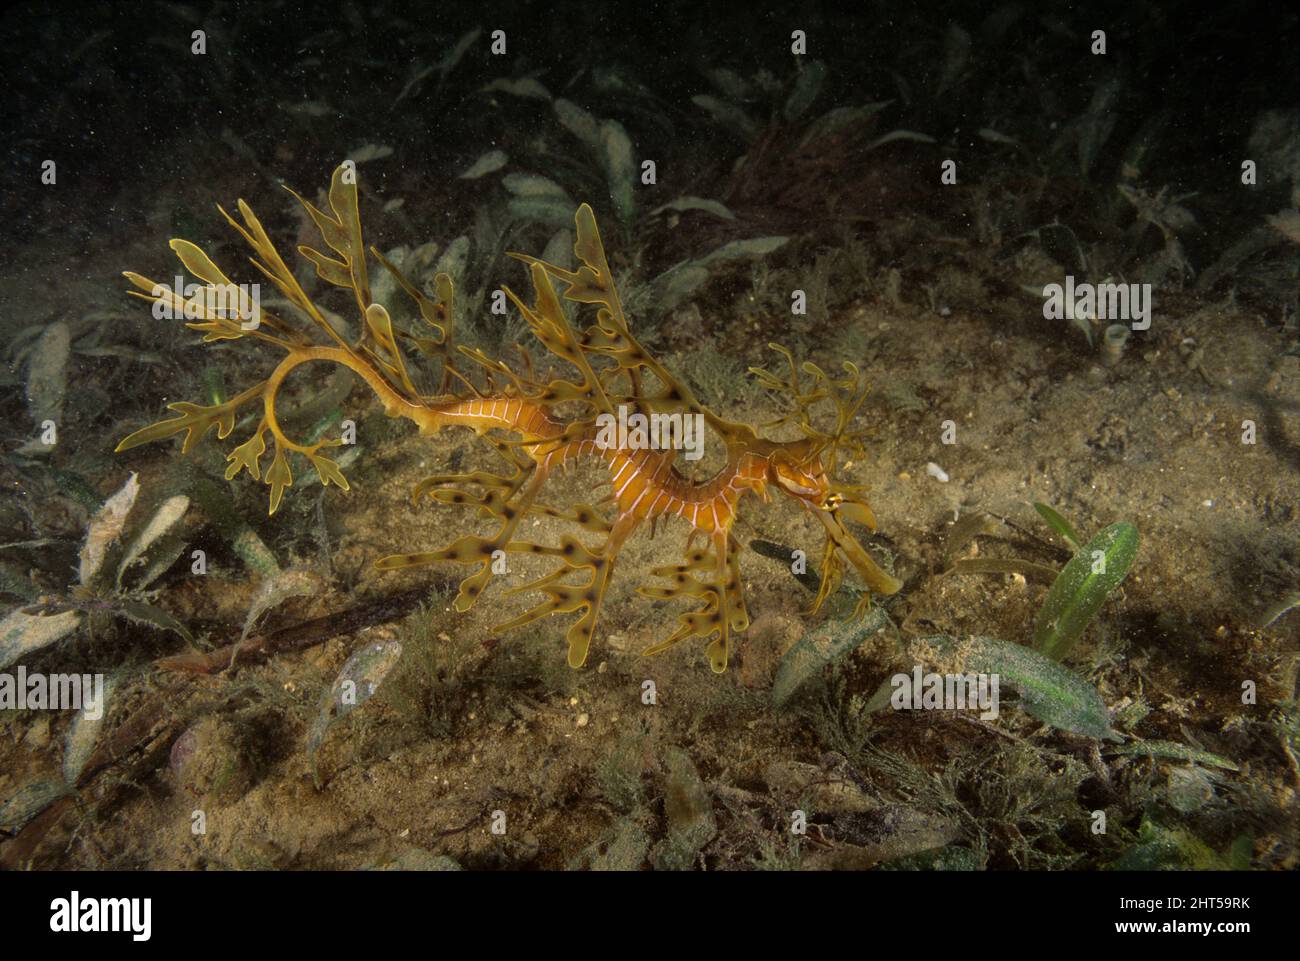 Leafy seadragon (Phycodurus eques), juvenile, not uncommon but rarely seen due to camouflage. Always lives near kelp and seems to prefer muddy water. Stock Photo